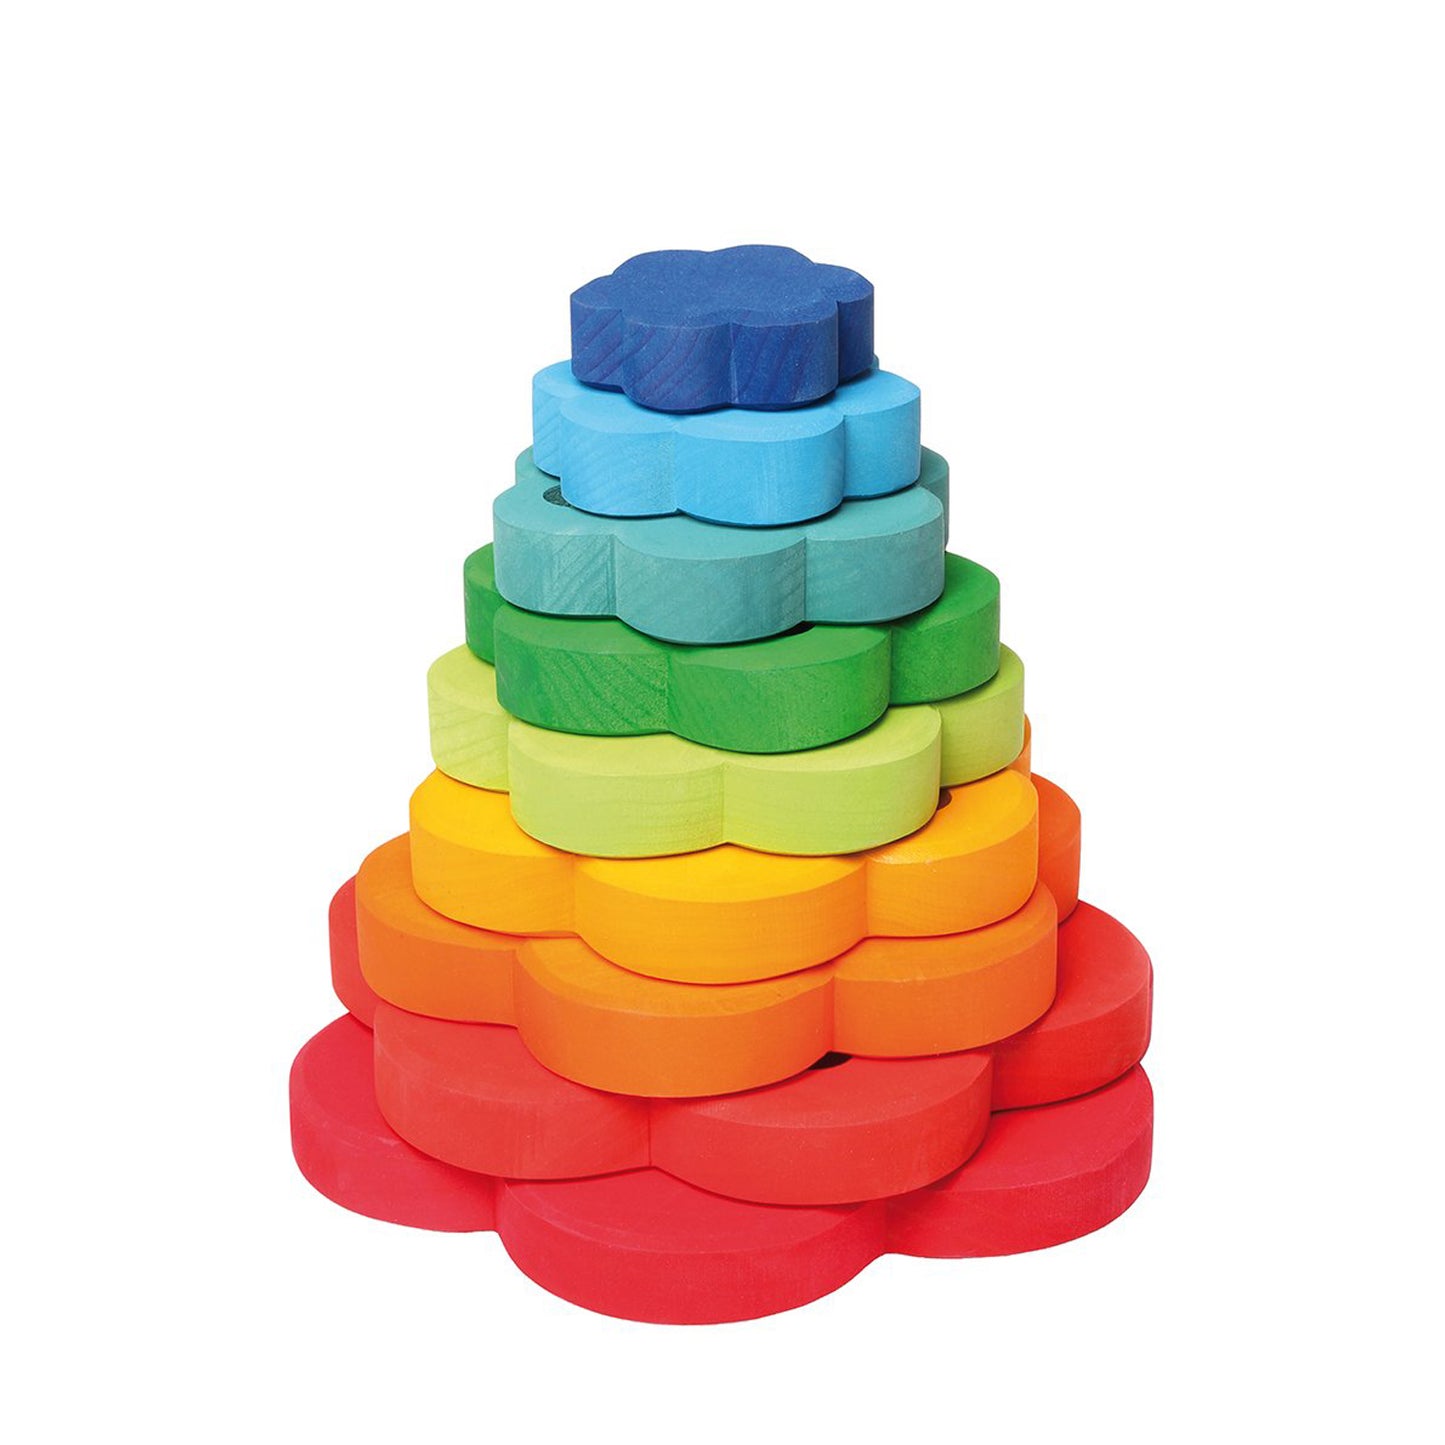 FLOWER STACKING TOWER